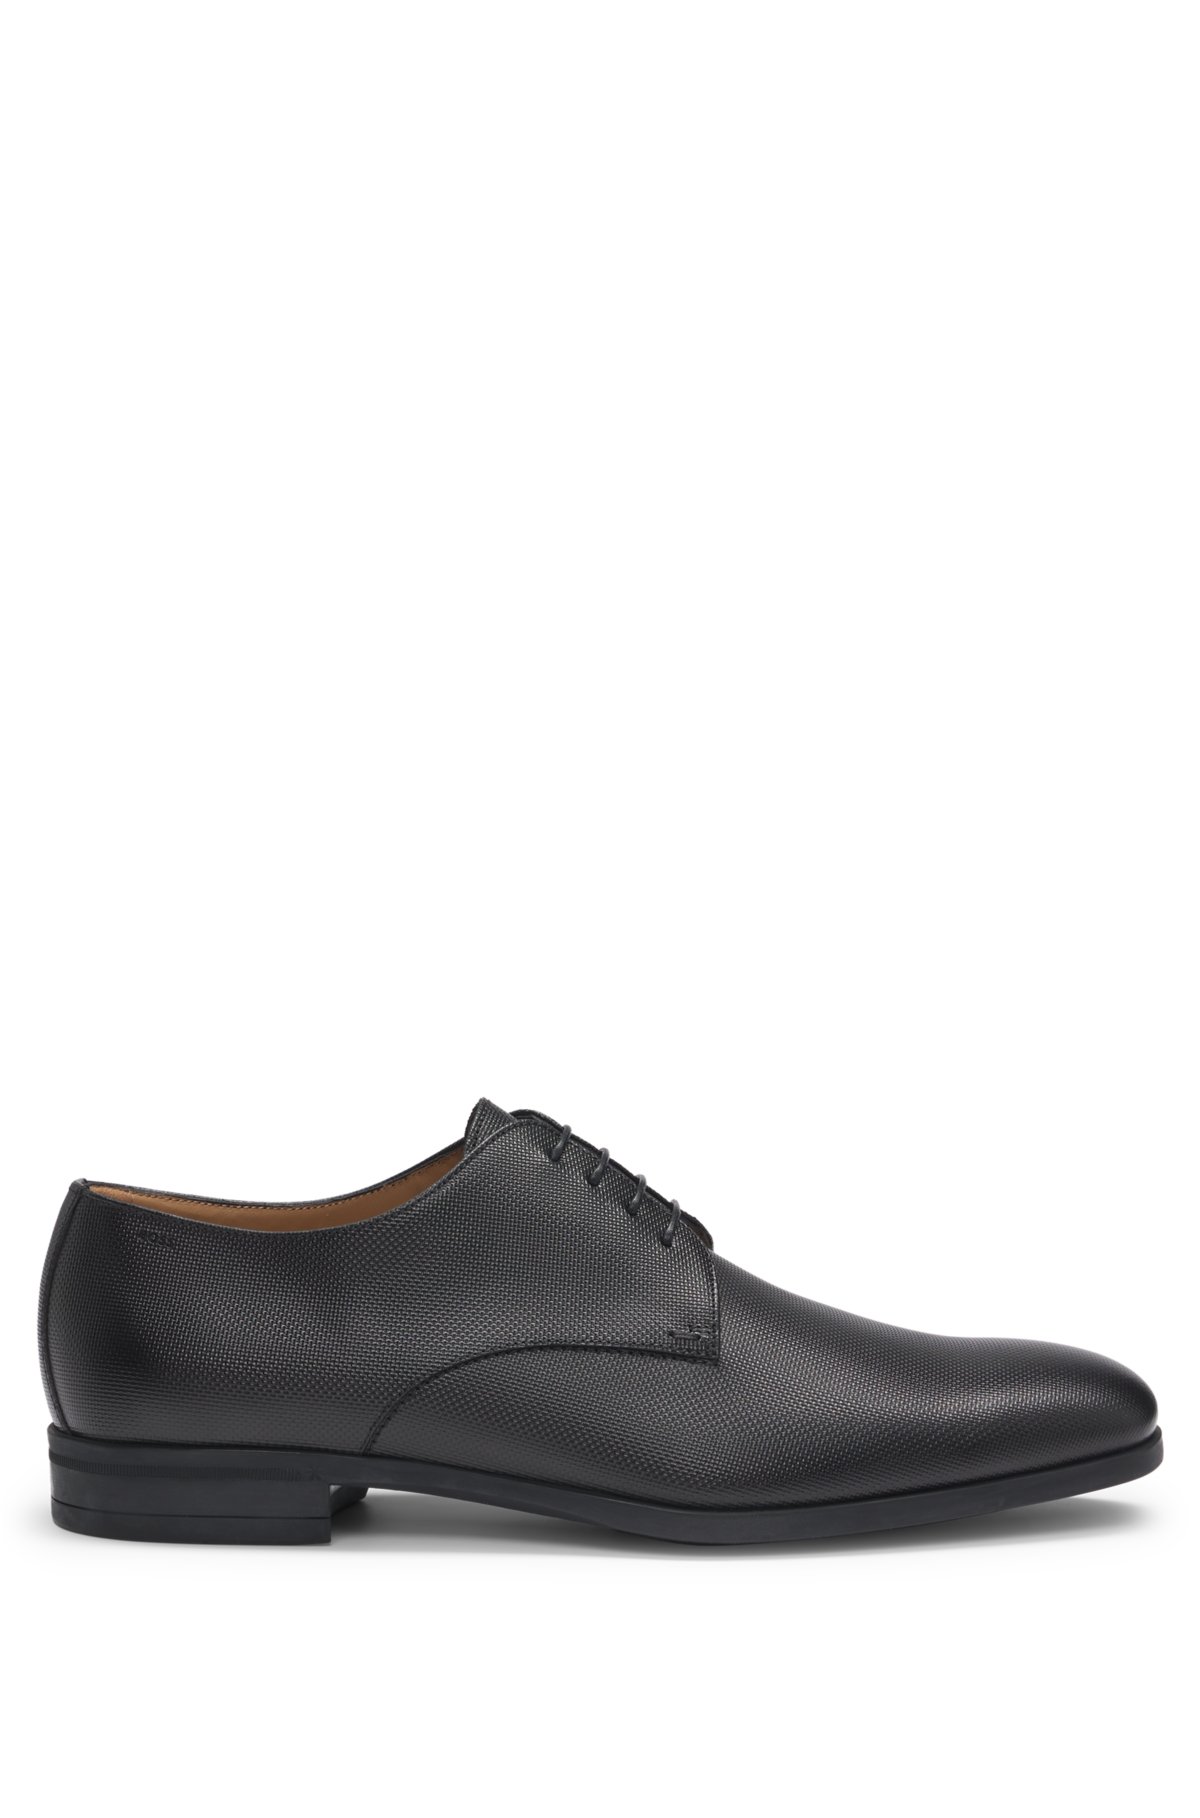 Derby shoes in structured leather with padded insole, Black